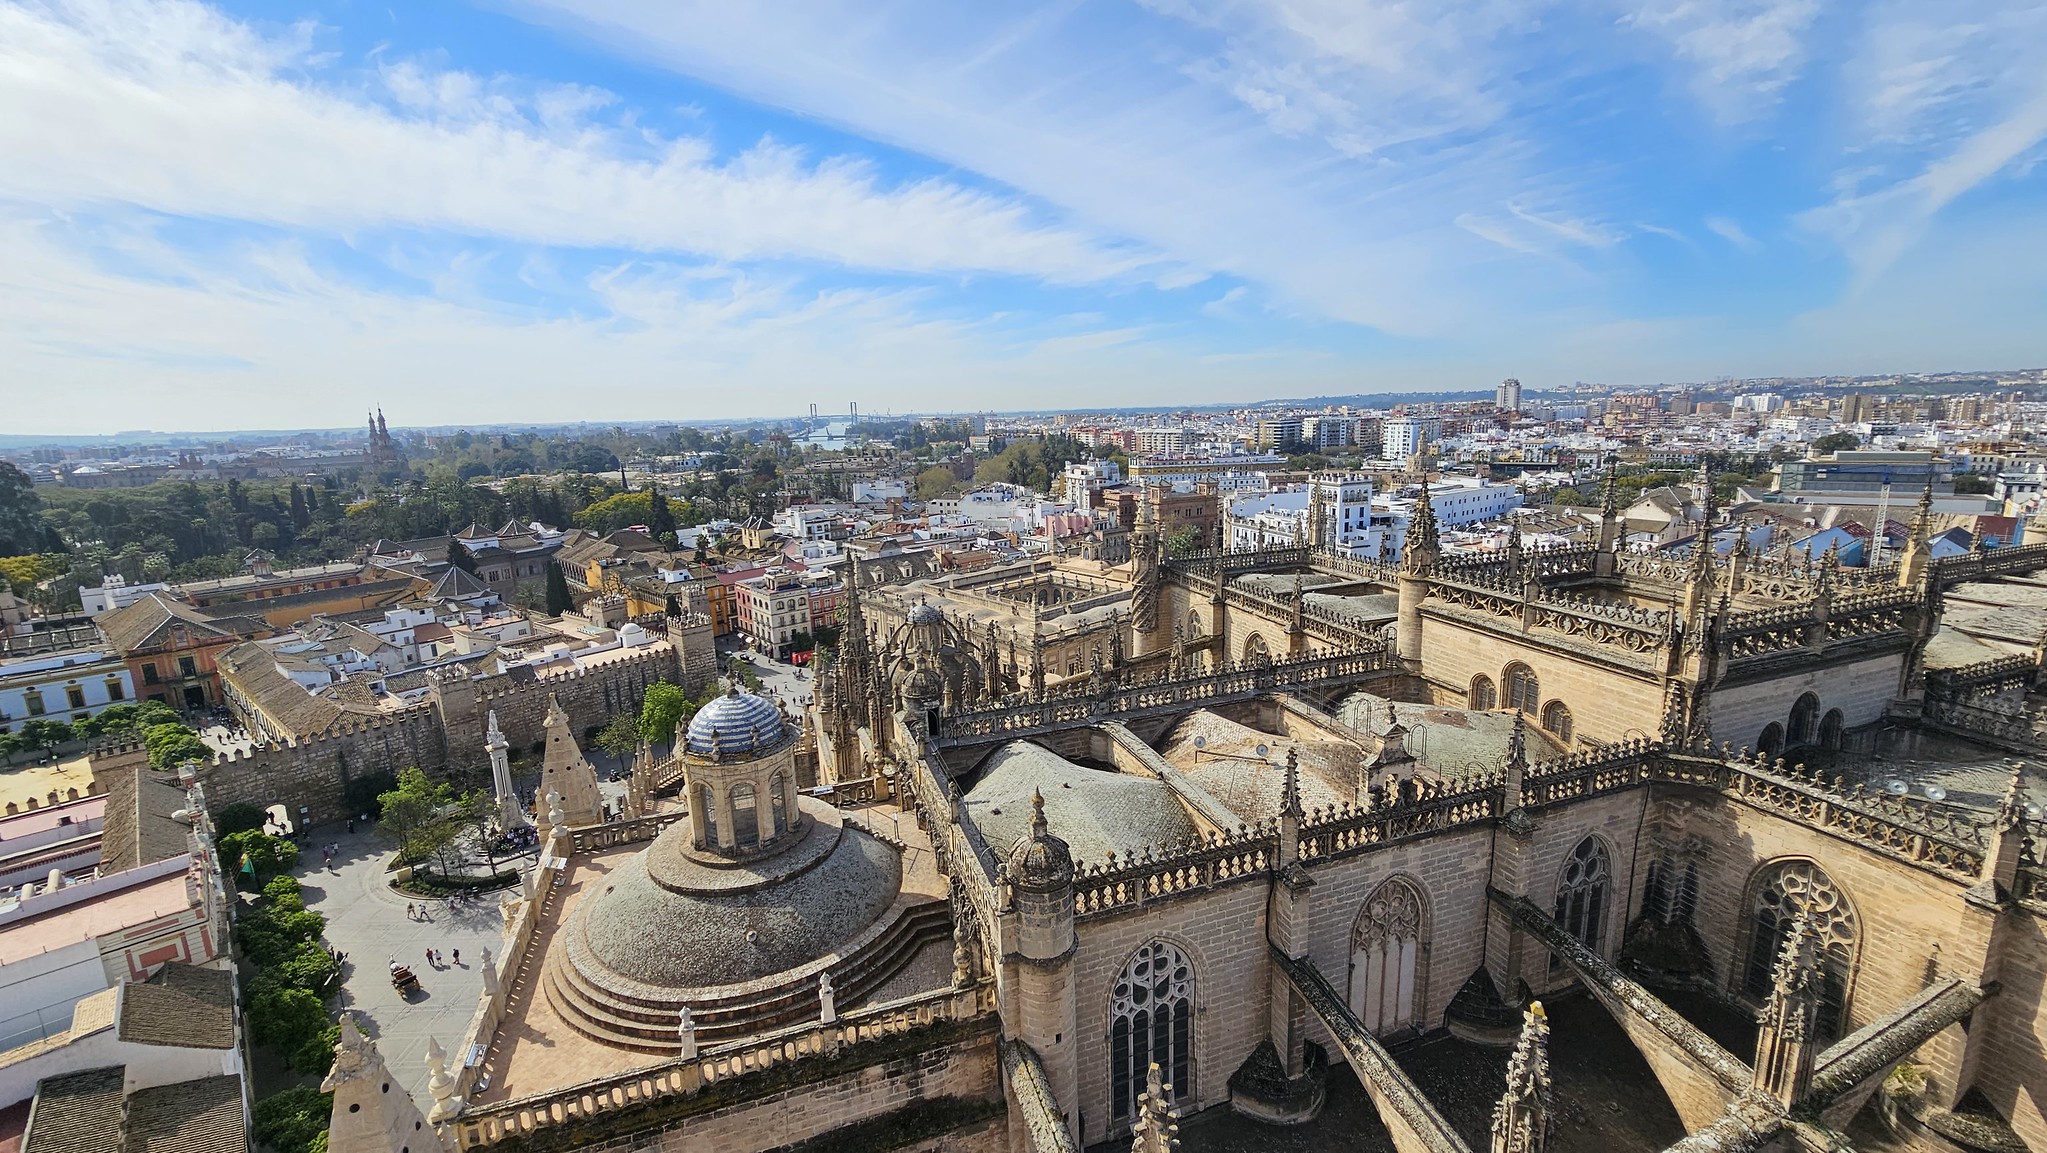 Initial view from the tower over the city of Seville